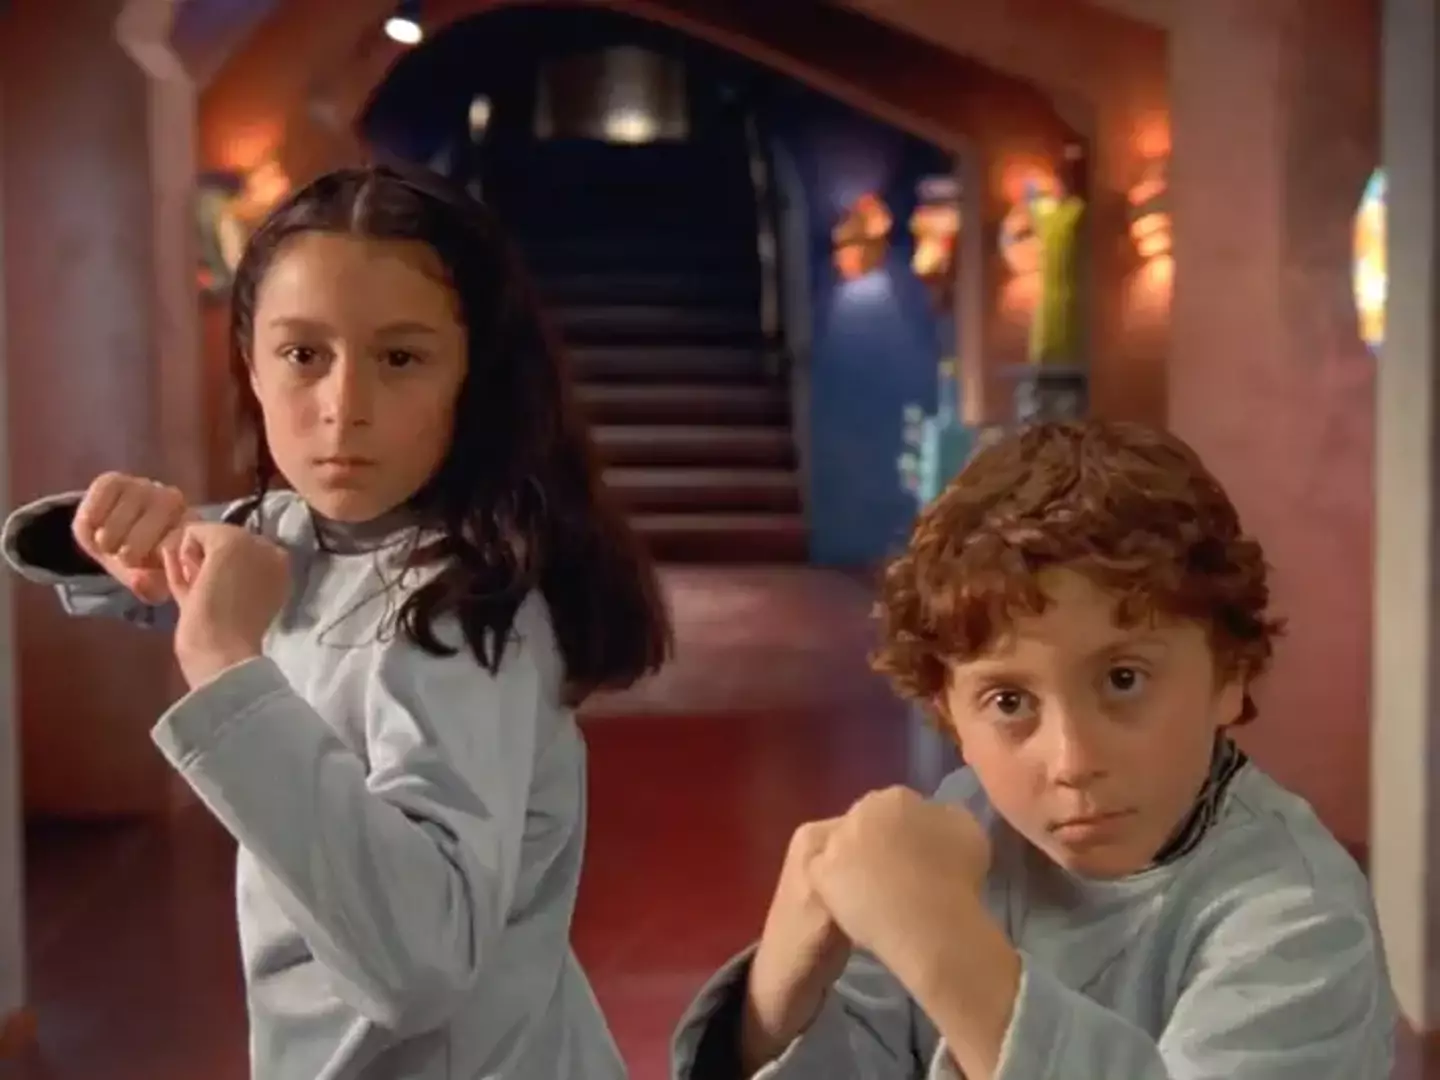 There are four Spy Kids films and an animated series.